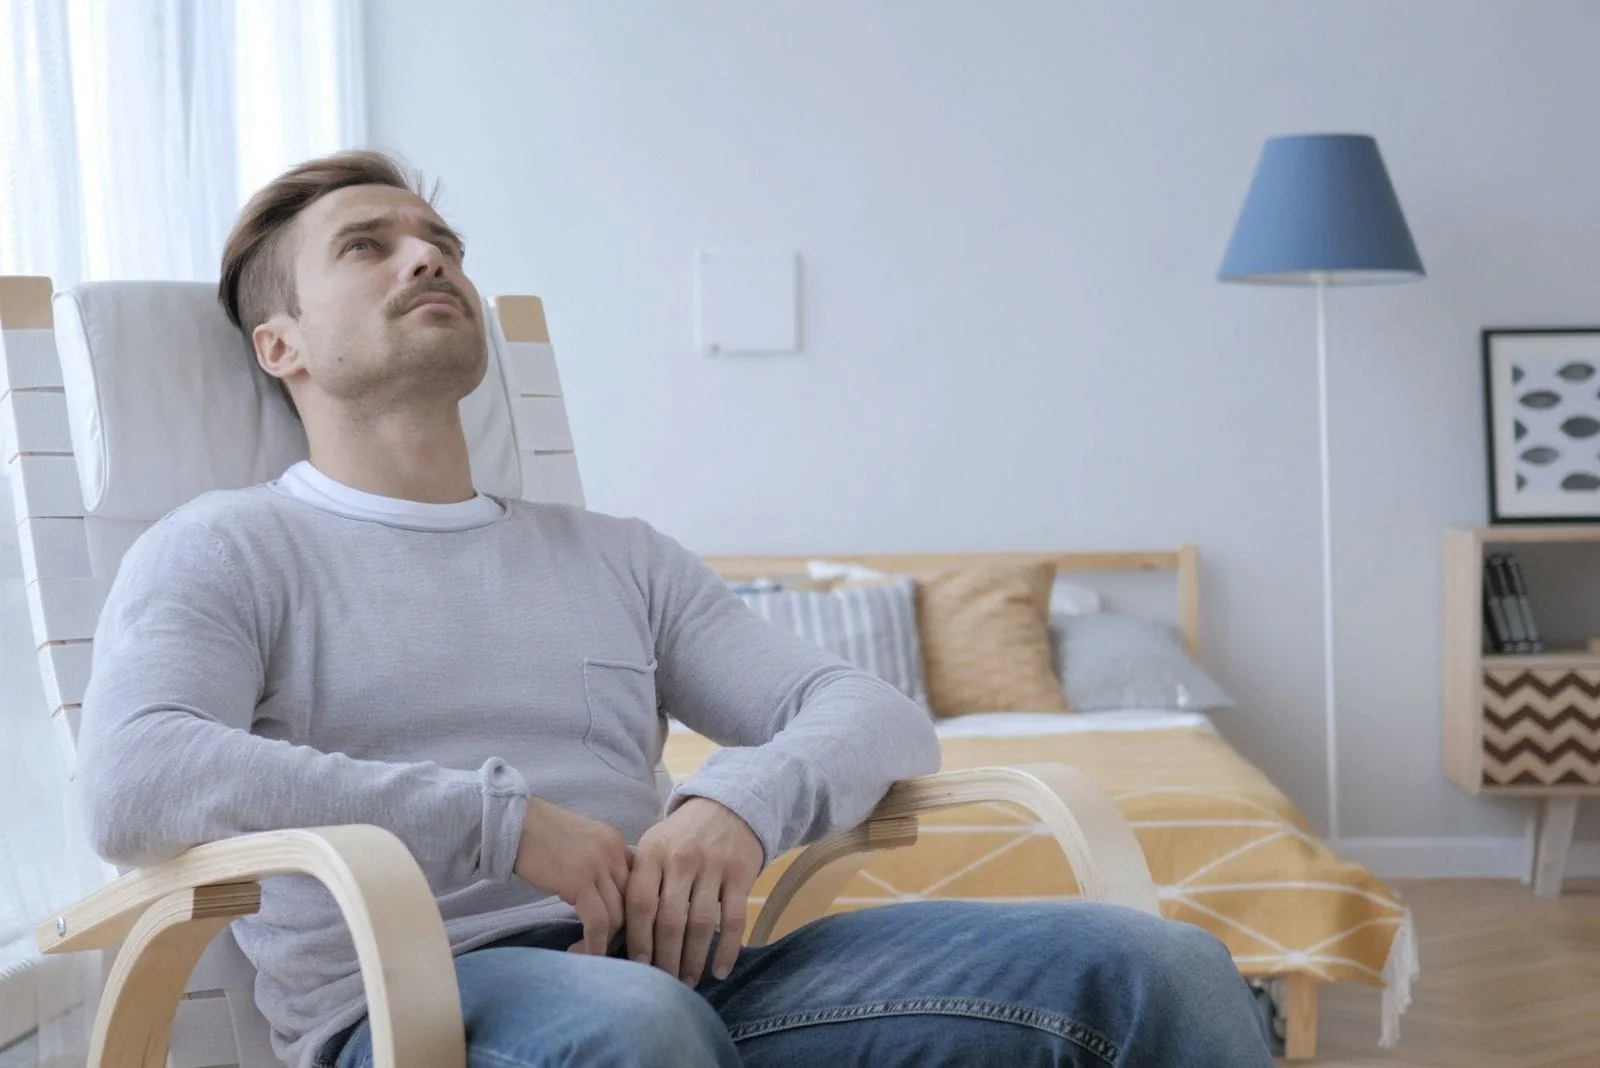 pensive adult man sitting on the chair inside the bedroom looking at the roof